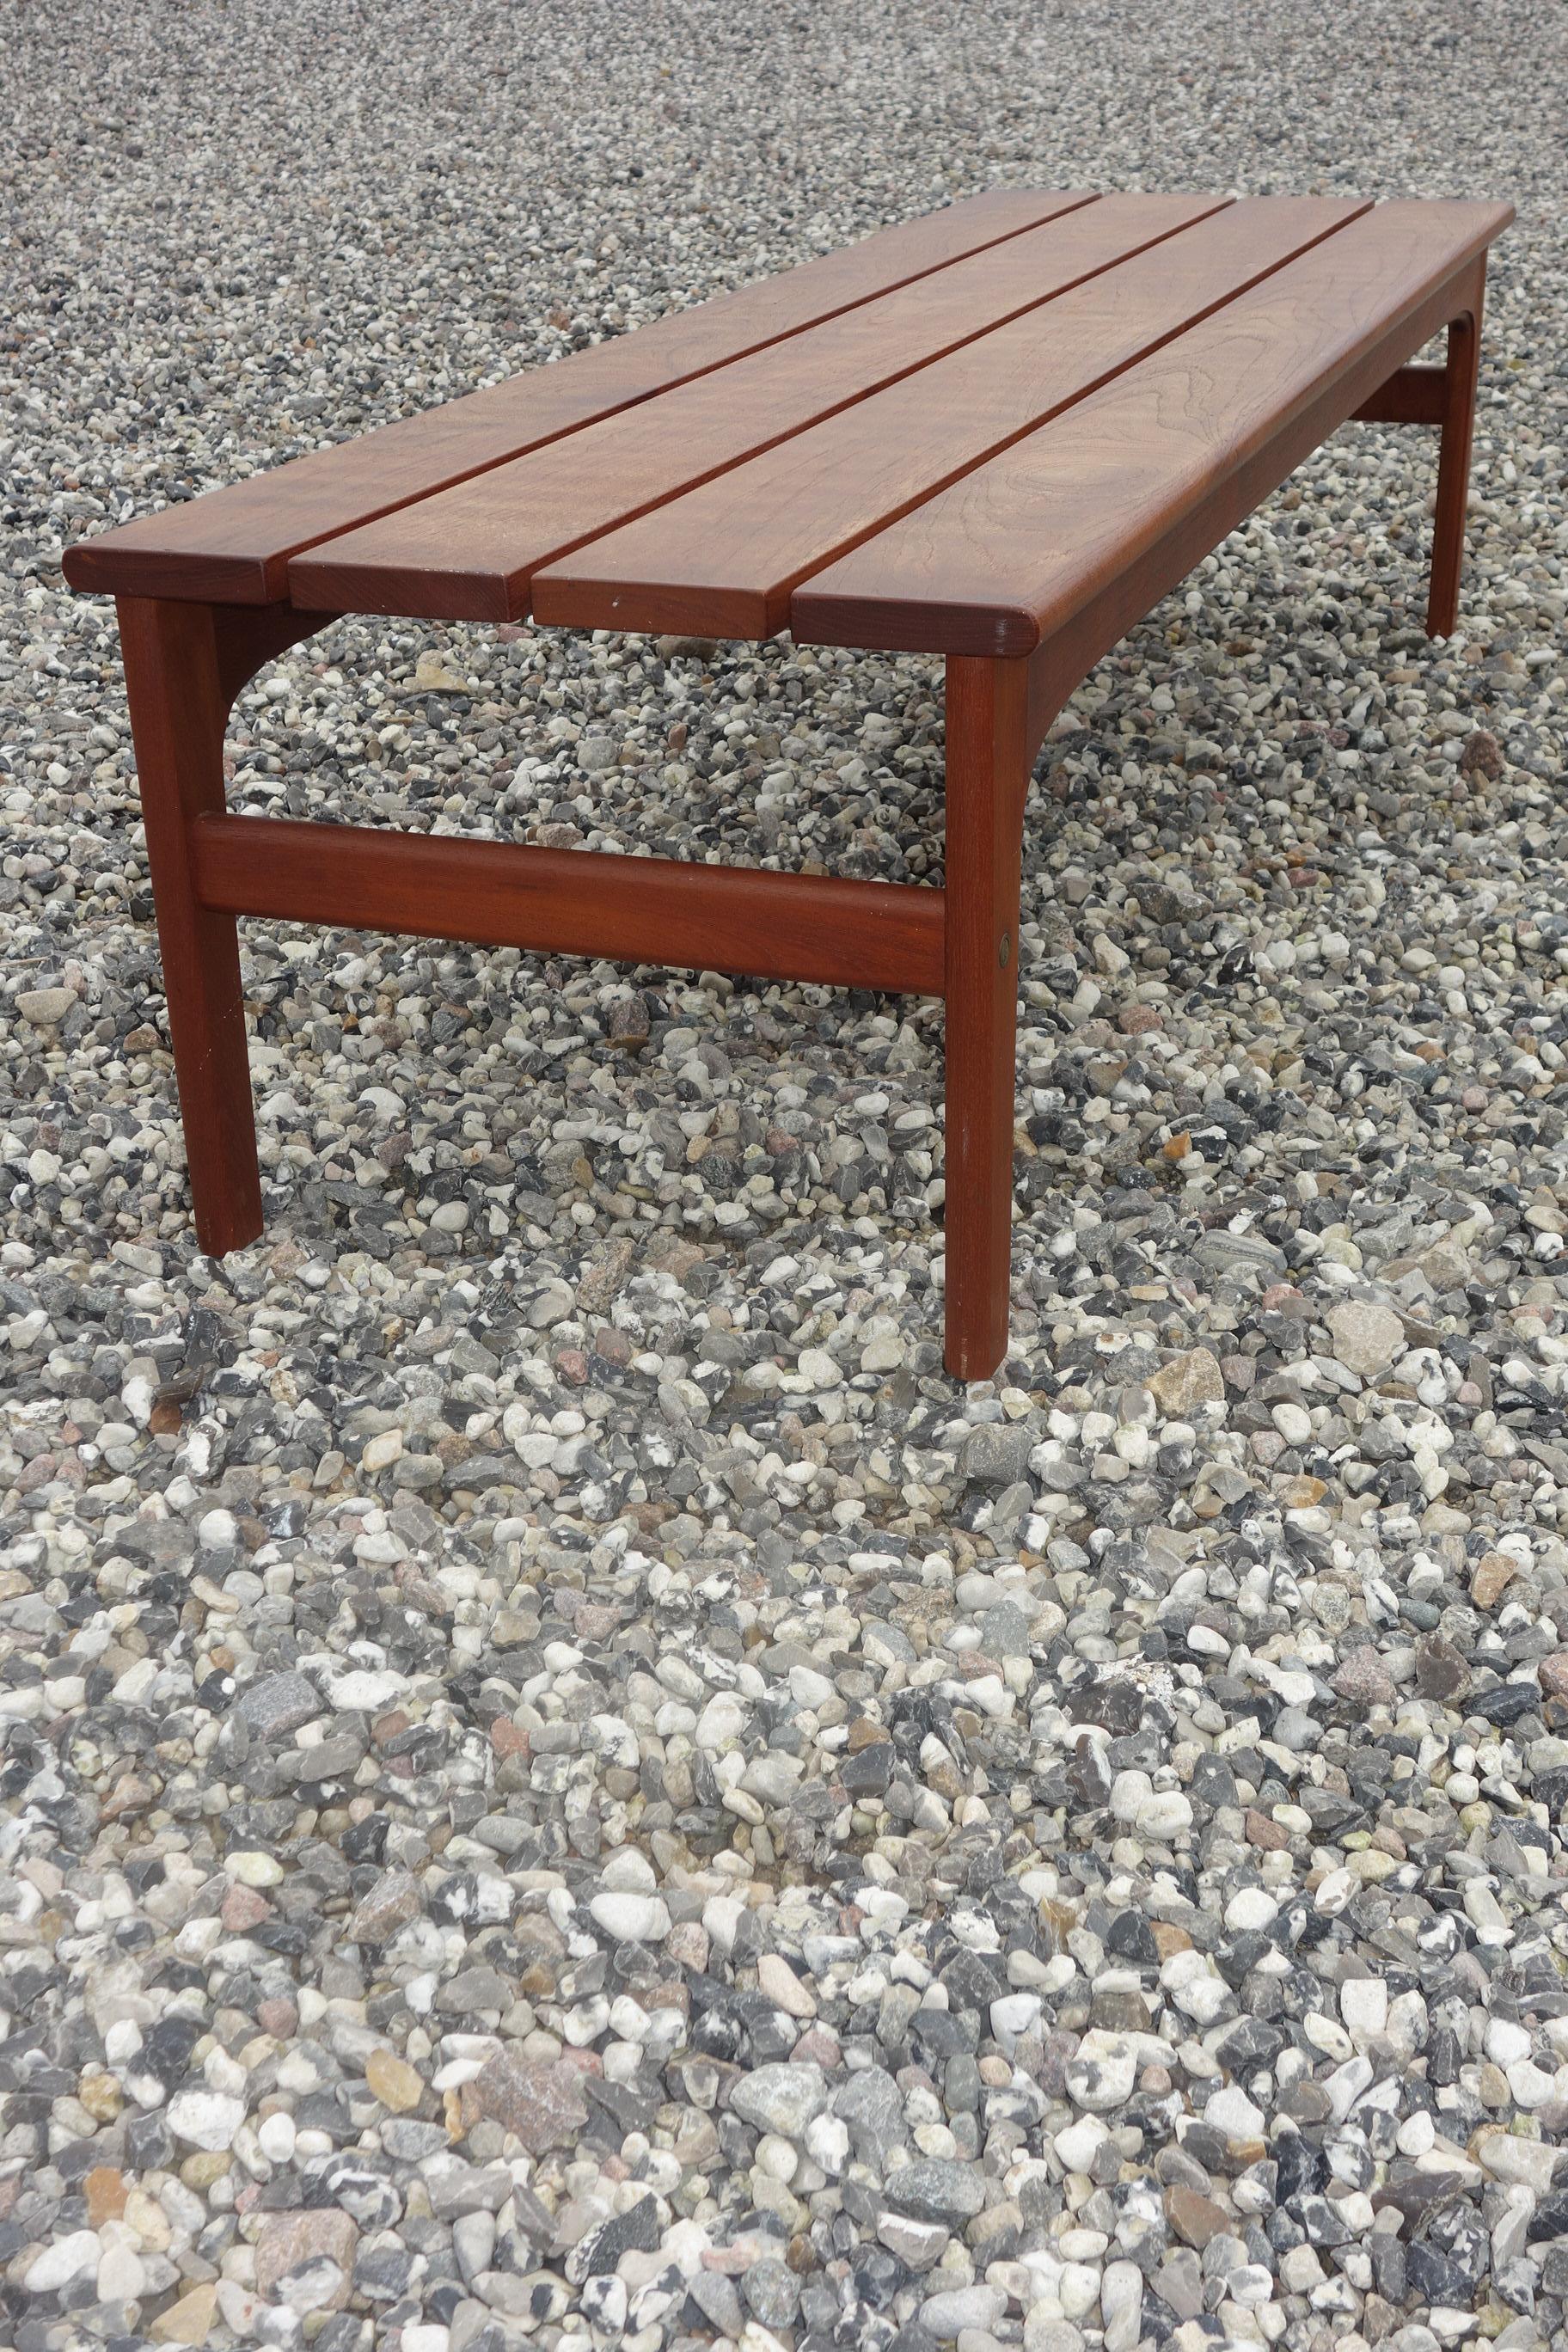 Yngve Sandström bench in solid teak made in Sweden by Seffle Möbelfabrik. Very solid and high quality bench.